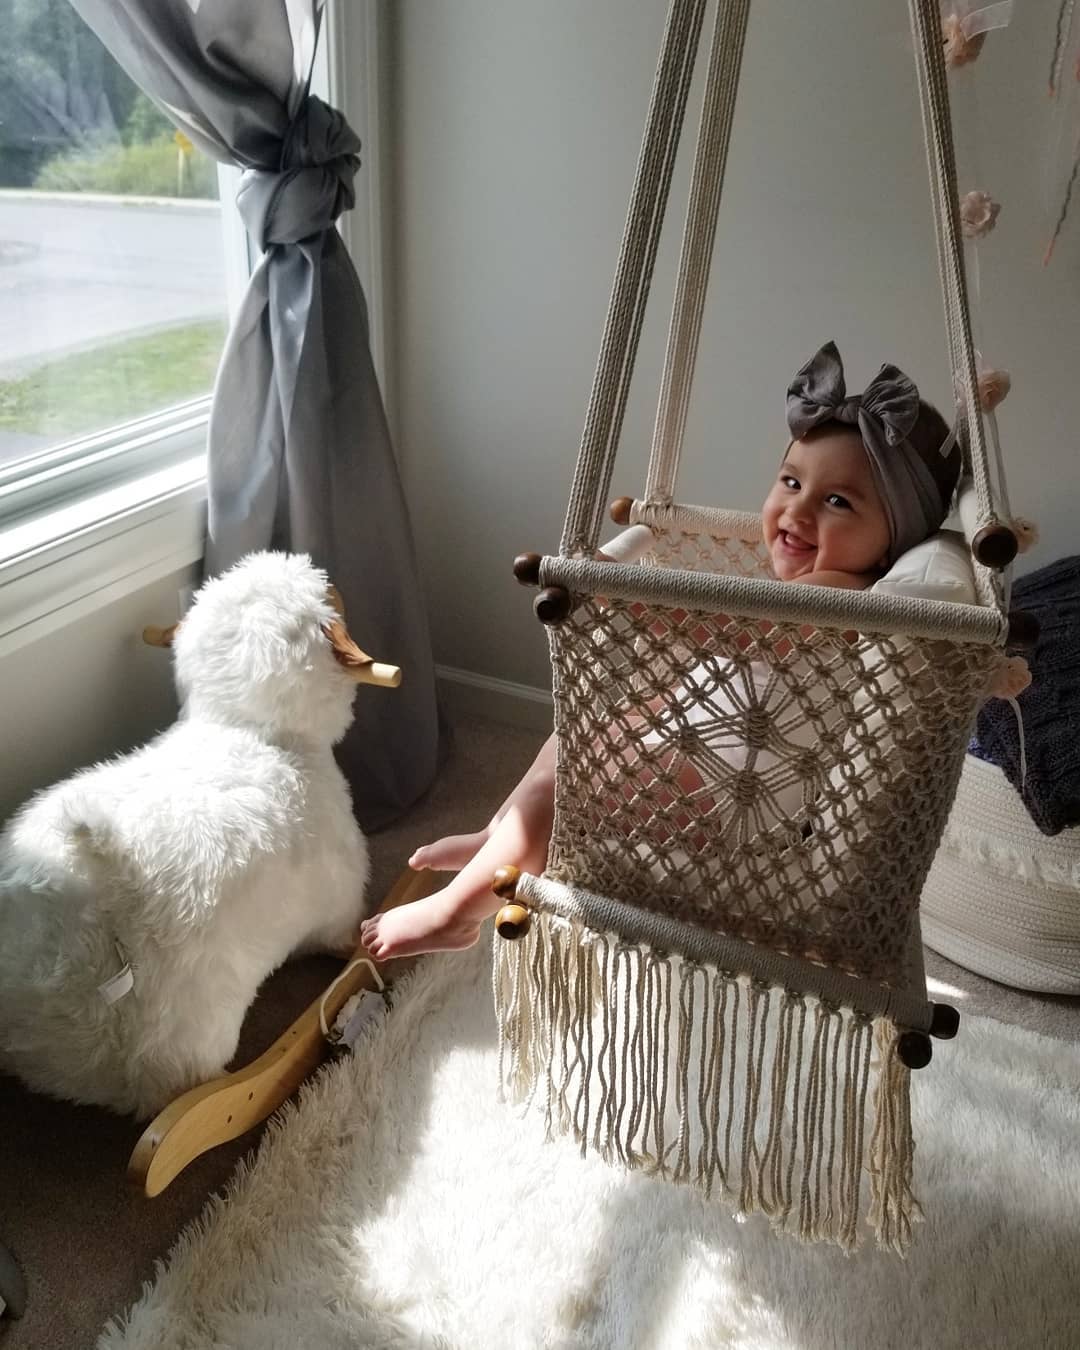 baby smiling while is swinging on a swing chair in front of a window 